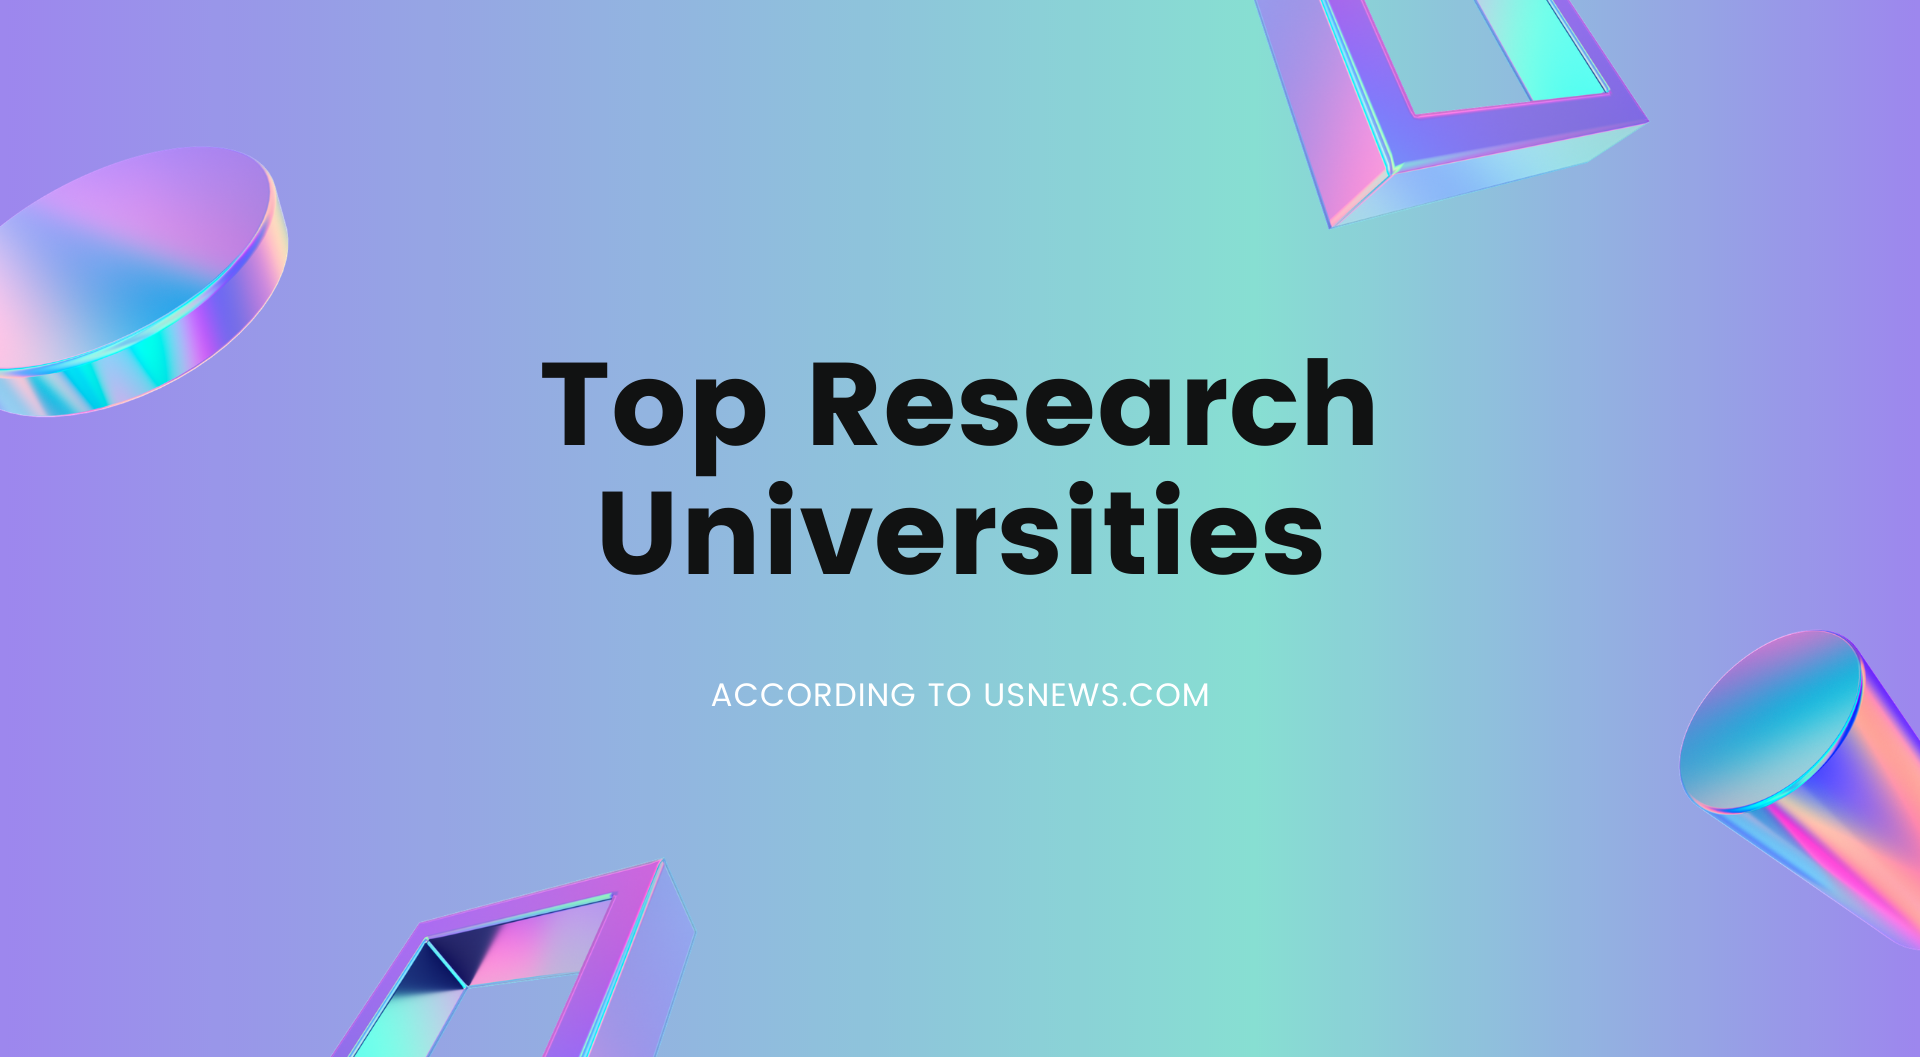 Top Research Universities in the World